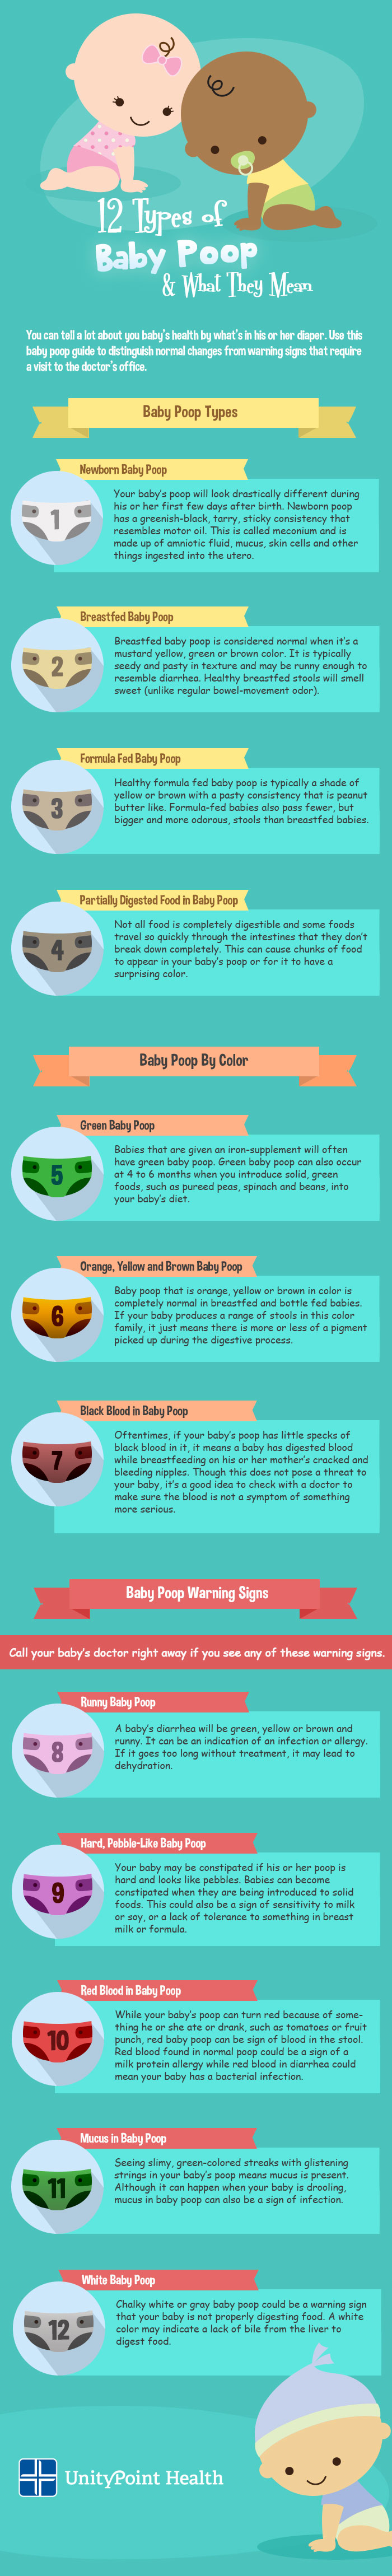 12 Types of Baby Poop and What They Mean.jpg